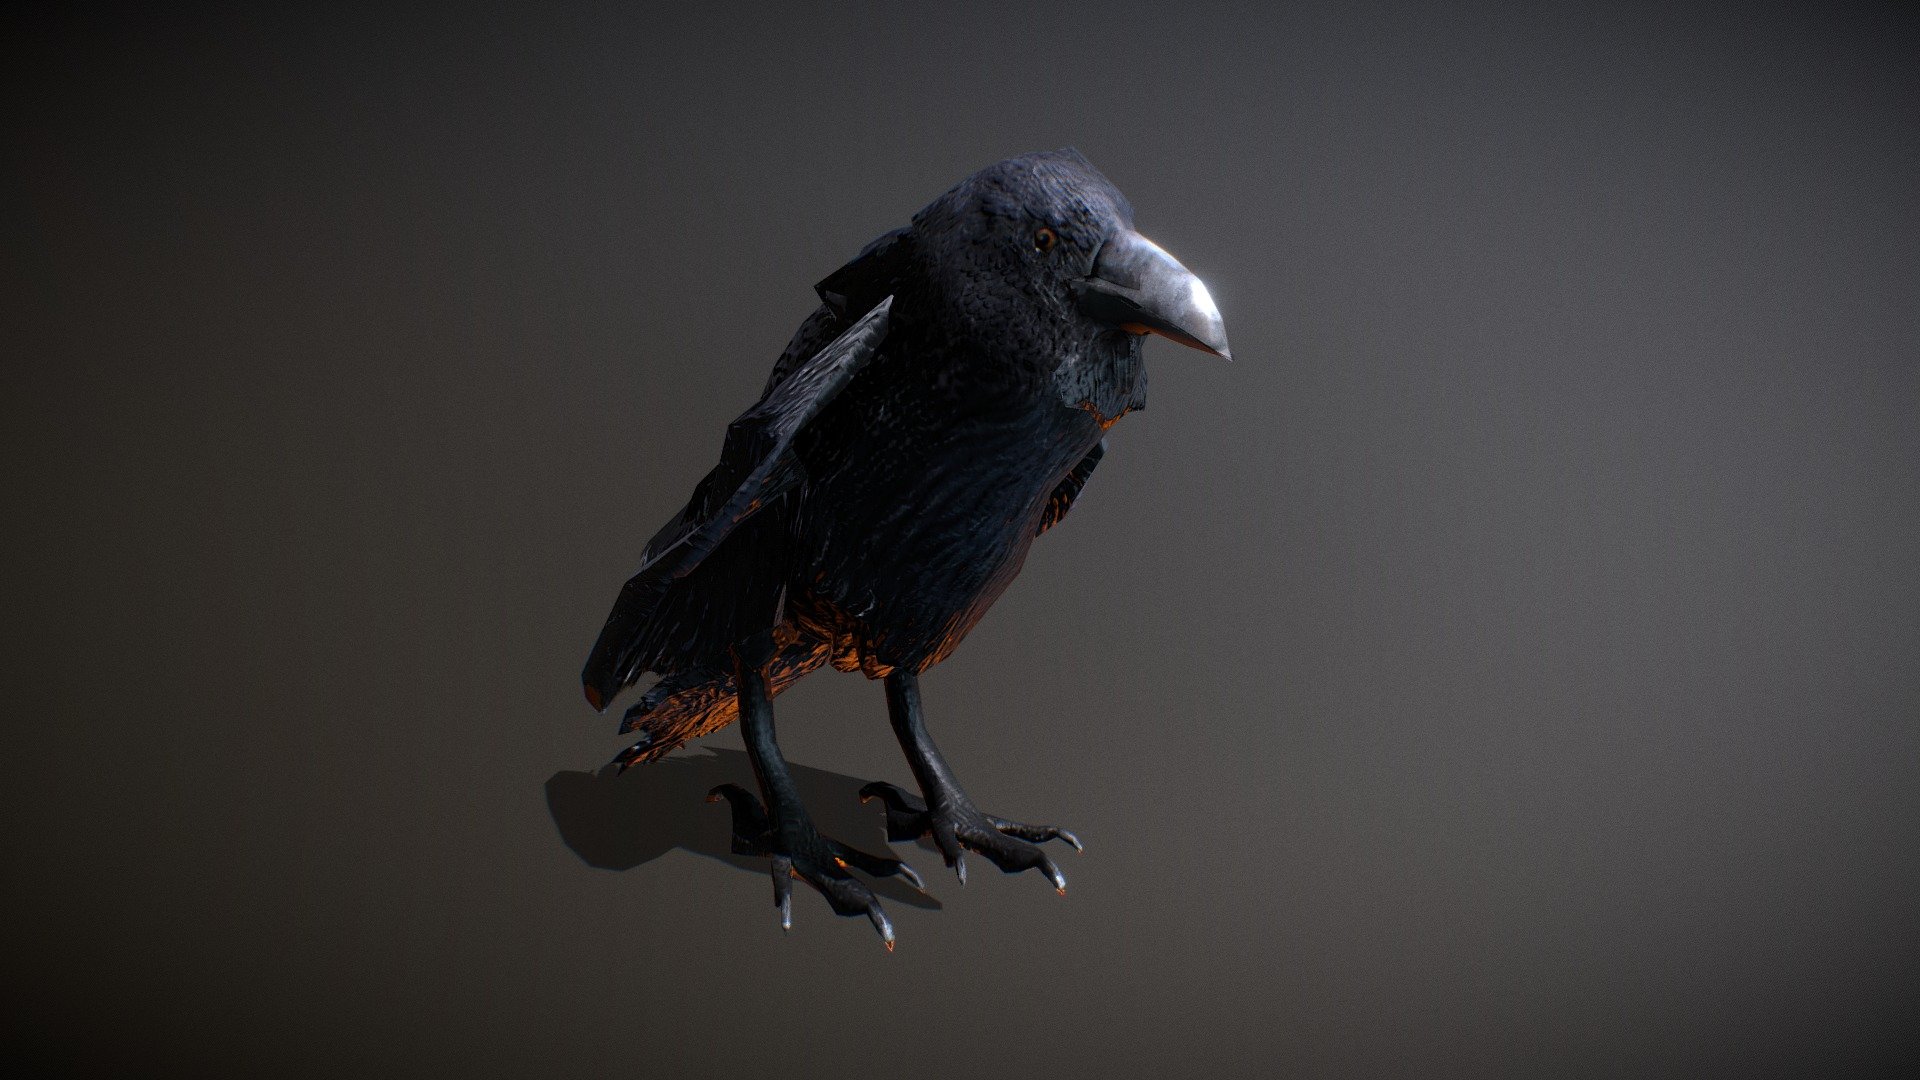 Lowpoly model whit basic animations

List of animations:




Ground idle

Scared and fly away

Fly idle

Fly attack

Fly take damage

Fly around whit fly idle keyframe start/end

Death

Programs used:




Zbrush

Subtance Painter

Blender

Photoshop

blend file included

Tested in Unity Engine

4k textures - Raven - lowpoly - Buy Royalty Free 3D model by Vanitas Unhuman (@benmonor) 3d model